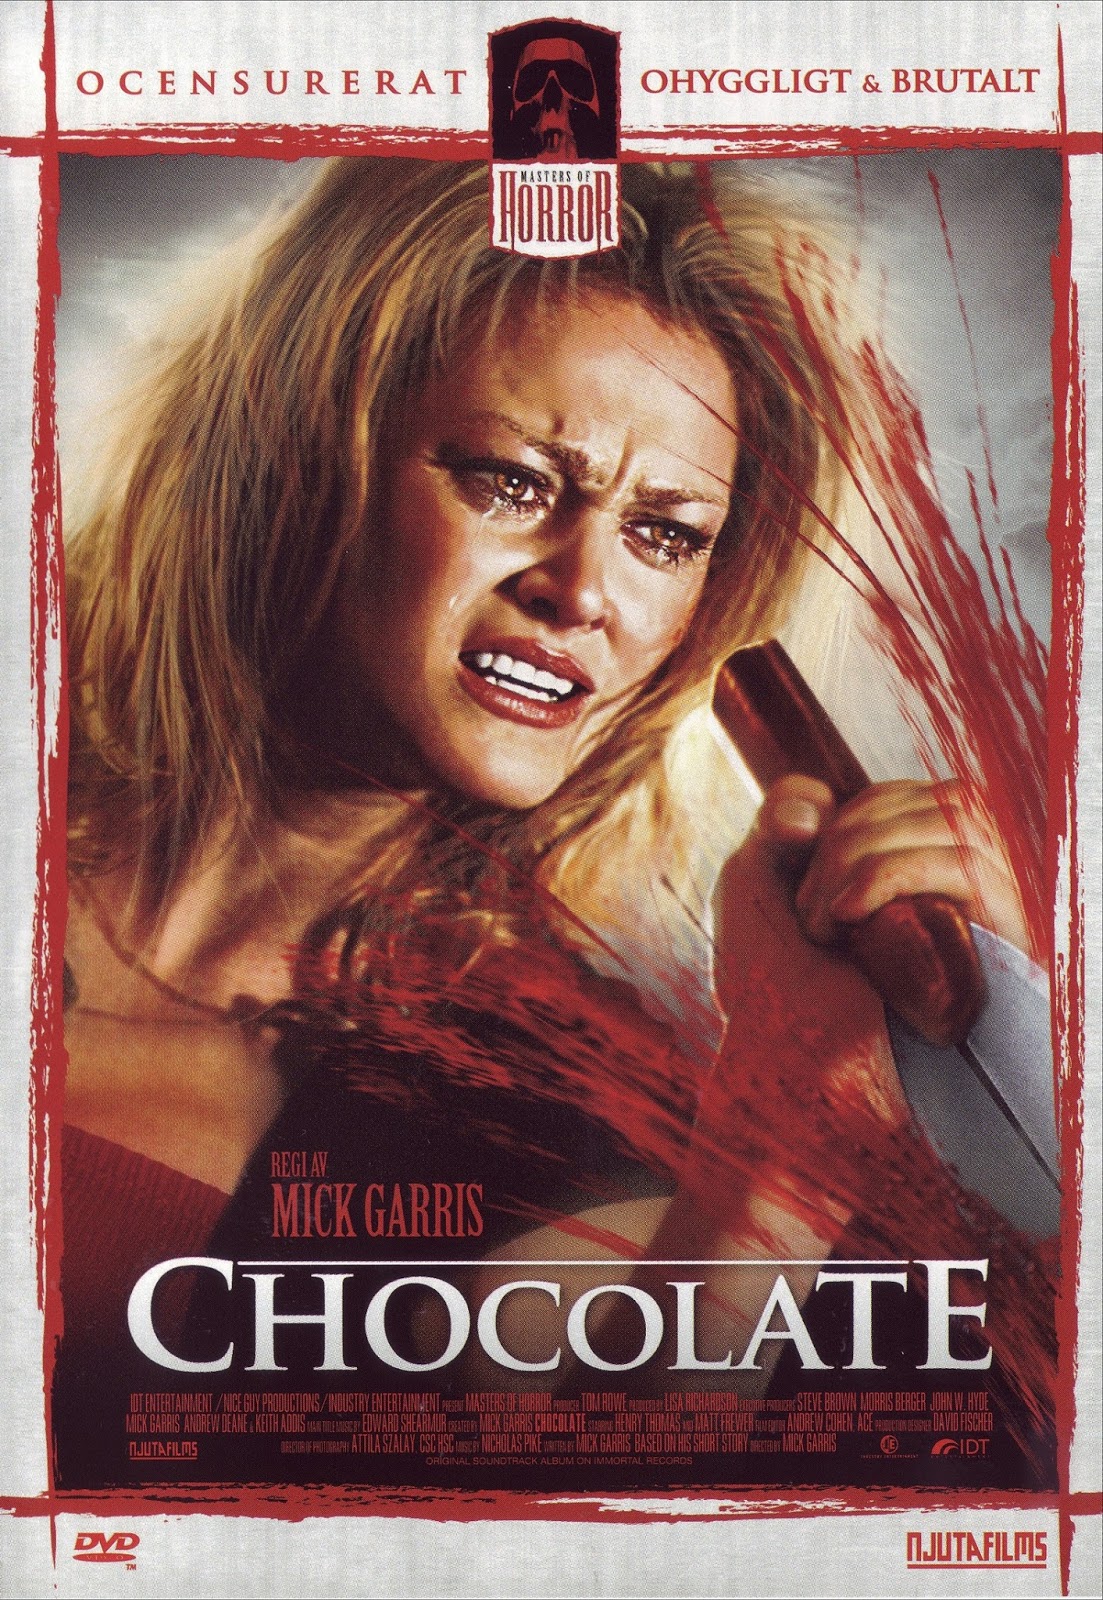 Masters of horror chocolate-Sex photo